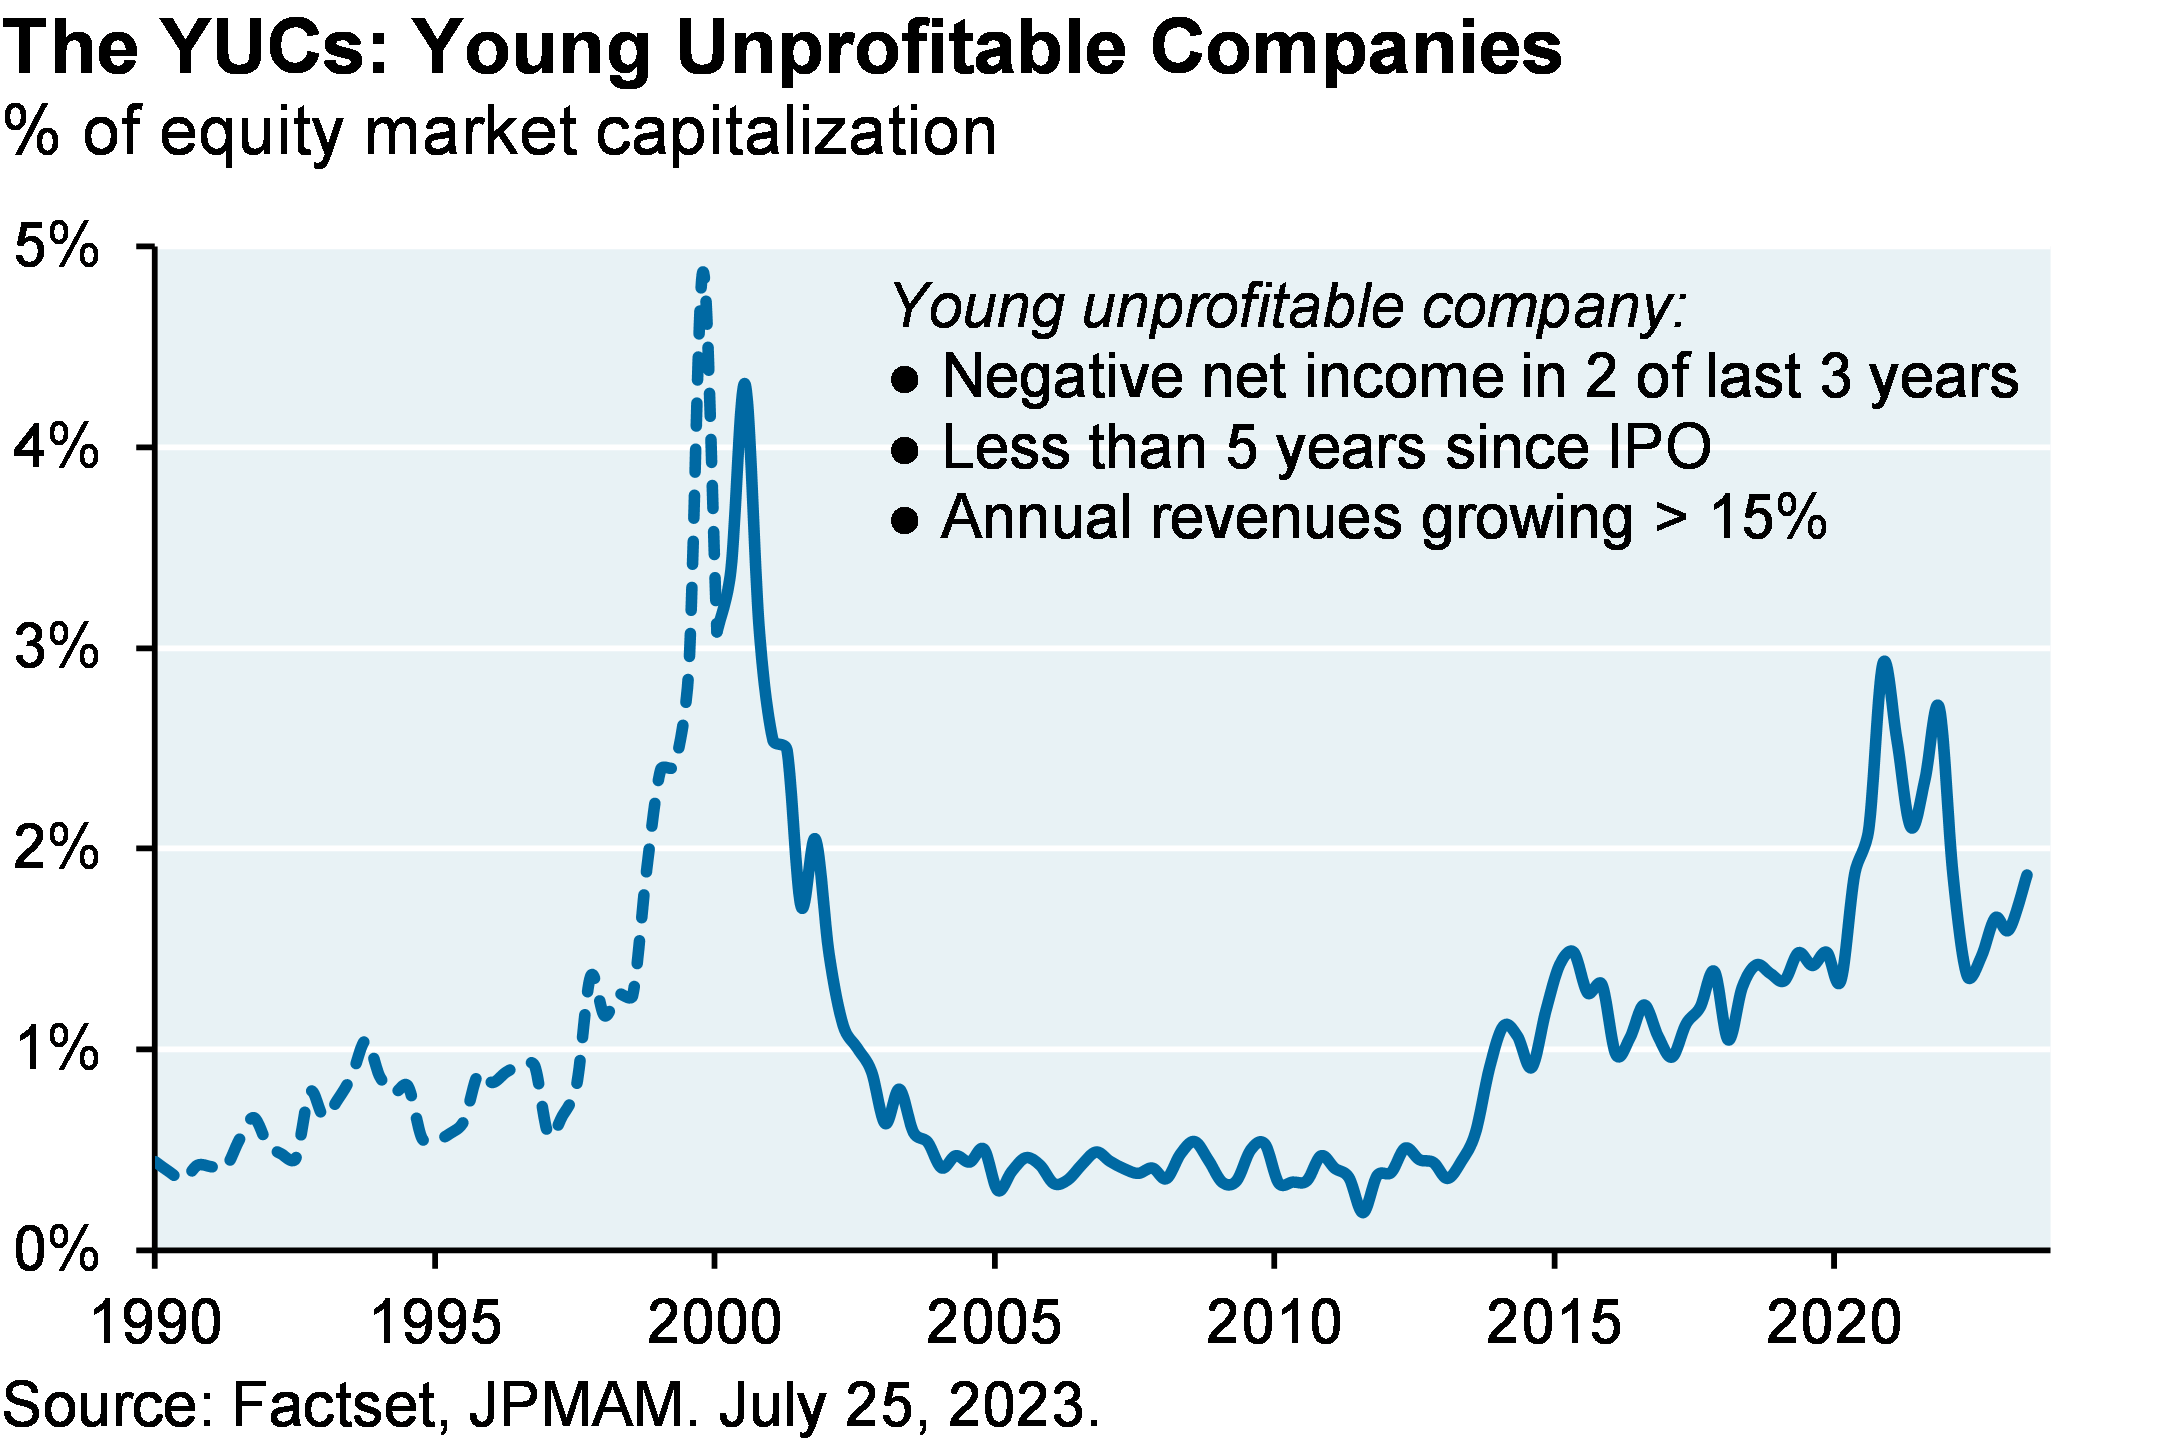 Line graph shows the young unprofitable companies as a % of equity market capitalization from 1990 through current date. The % of total market cap is beginning to increase again, following a decline in 2021-2022.